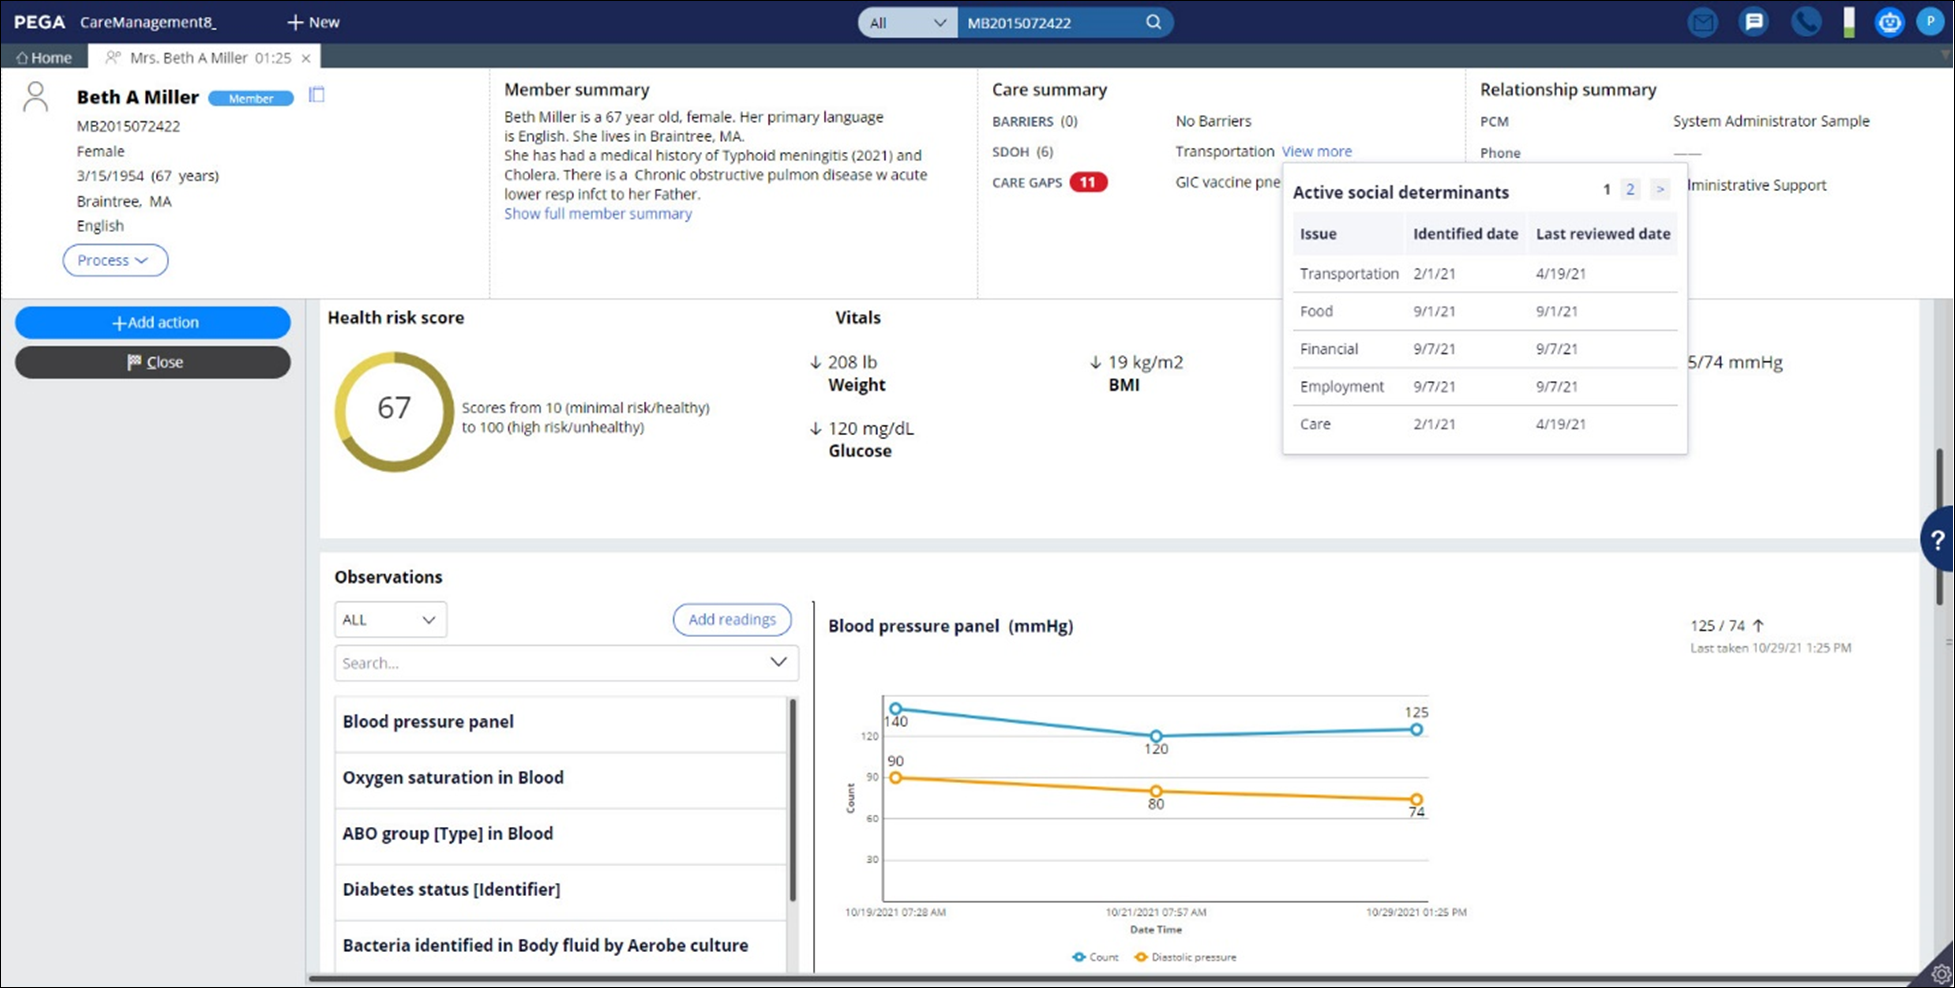 Shows Beth Miller's patient profile within the Unified Interaction Portal